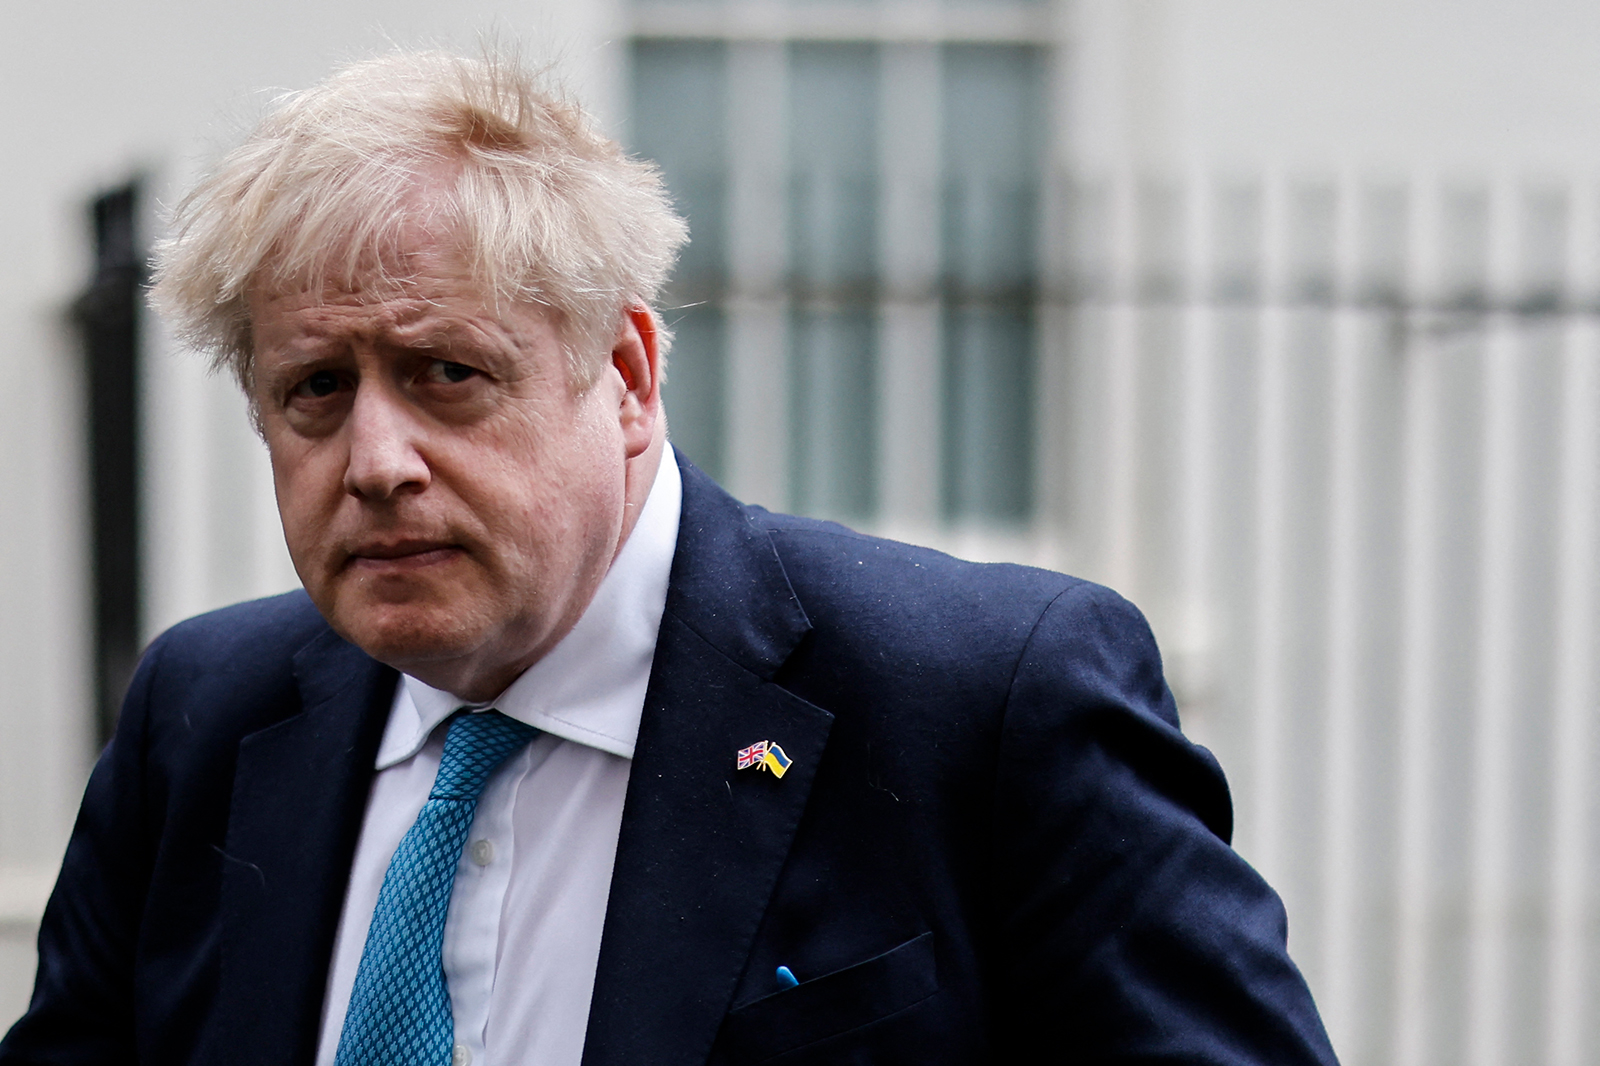 Britain's Prime Minister Boris Johnson leaves the 10 Downing Street, in London, on March 2.